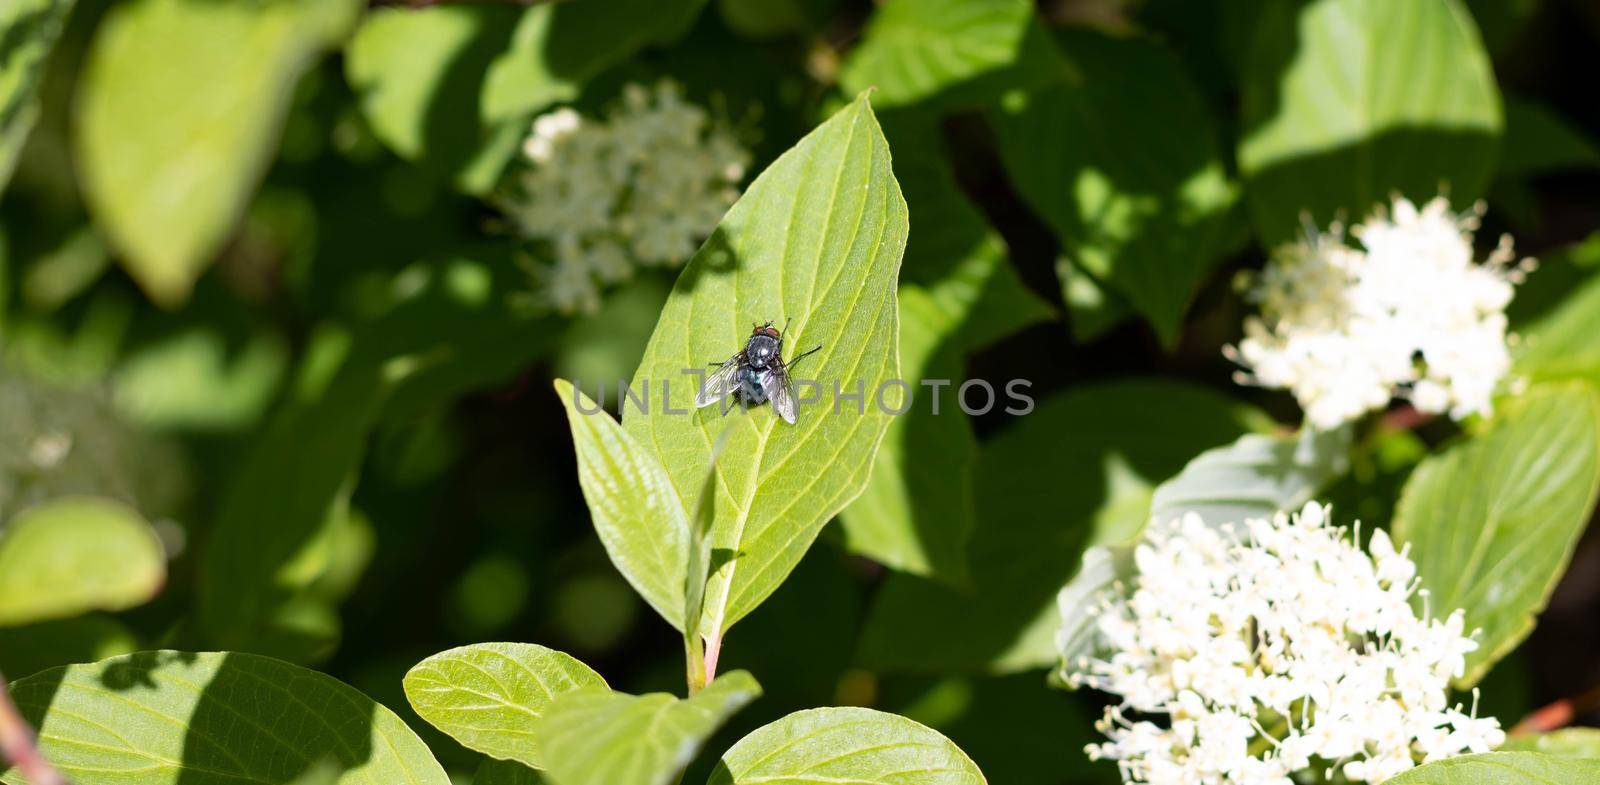 An ordinary blue fly sits on a green leaf close-up by lapushka62